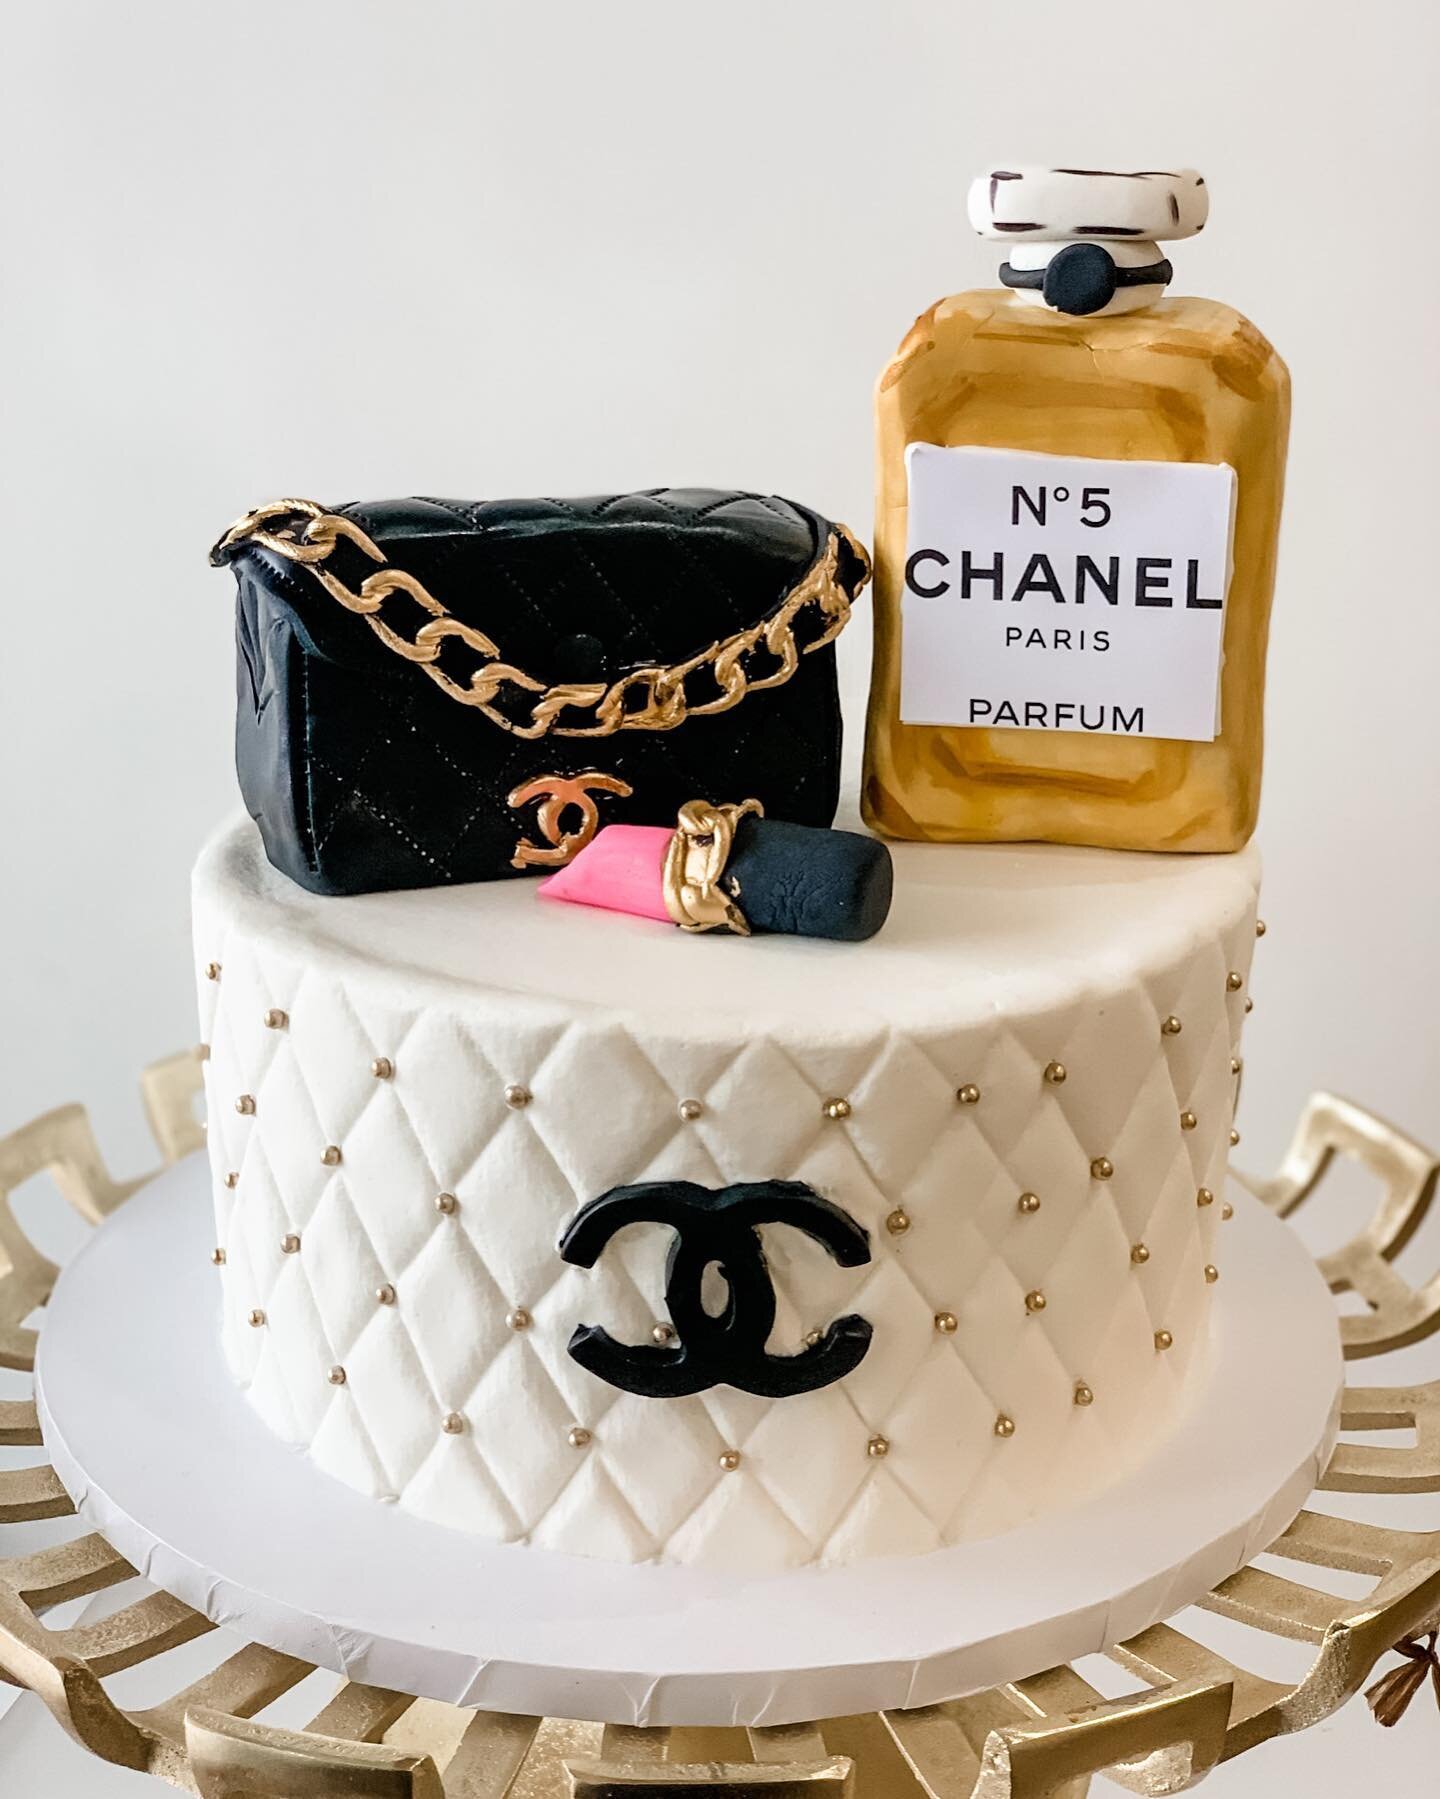 &ldquo;I only eat cake on two occasions, when I am in love and when I am not.&quot; Isn&rsquo;t that how the quote goes?! 🥂😅🖤 #cocochanel #drinkchampagne 

.
.
.
.
#chanel #chanelno5 #paris #parfume #classyandfabulous #chanelcake